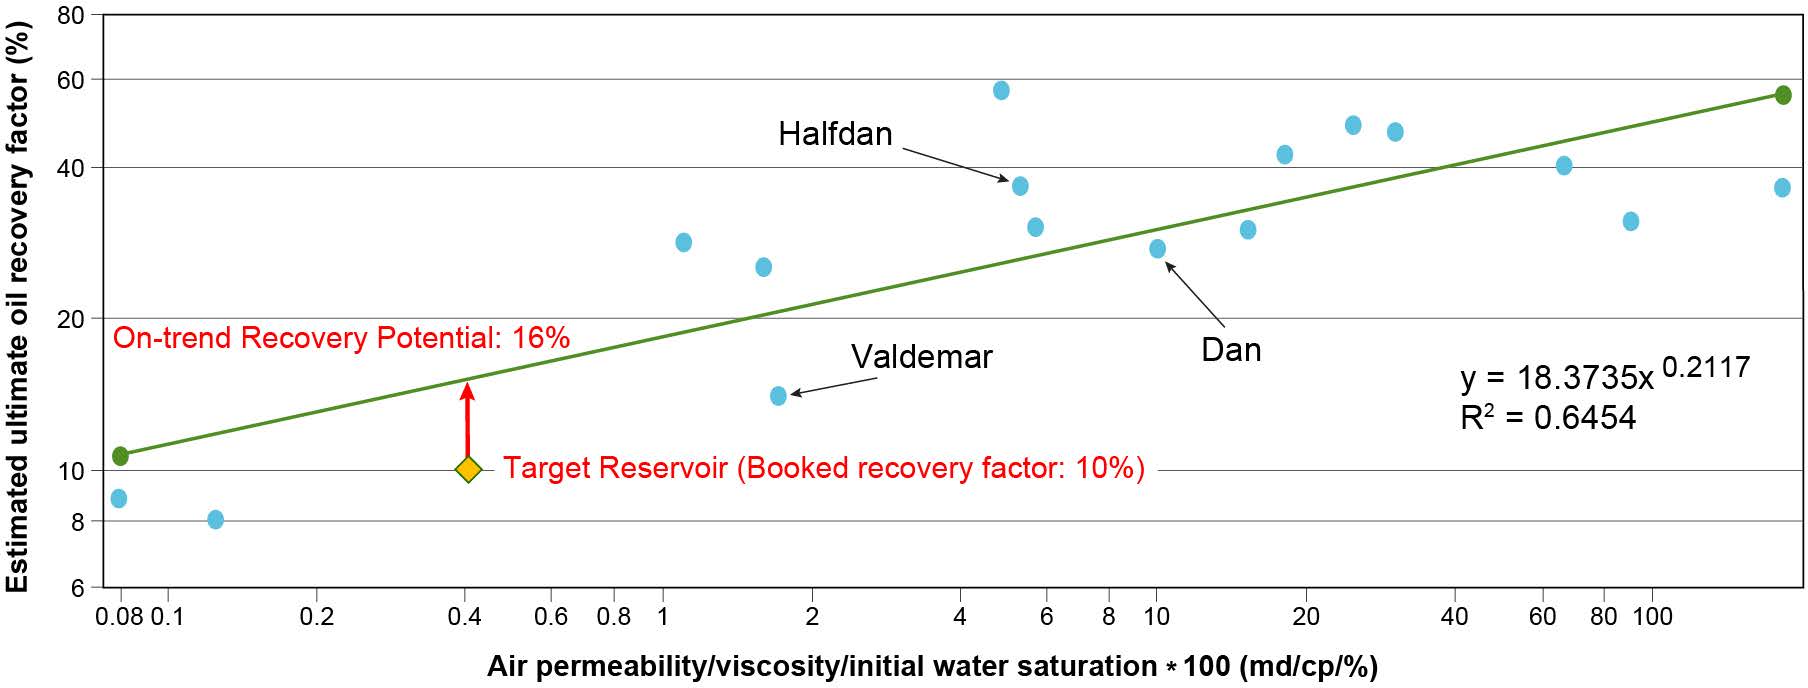 Fig. 2 - Estimated ultimate oil recovery factor versus air permeability/viscosity/initial water saturation crossplot for 15 fractured microporous oil reservoirs for which reliable air permeability, oil viscosity, and initial water saturation are available. These parameters were selected from the analogue group because they bear a strong control on recovery efficiency.